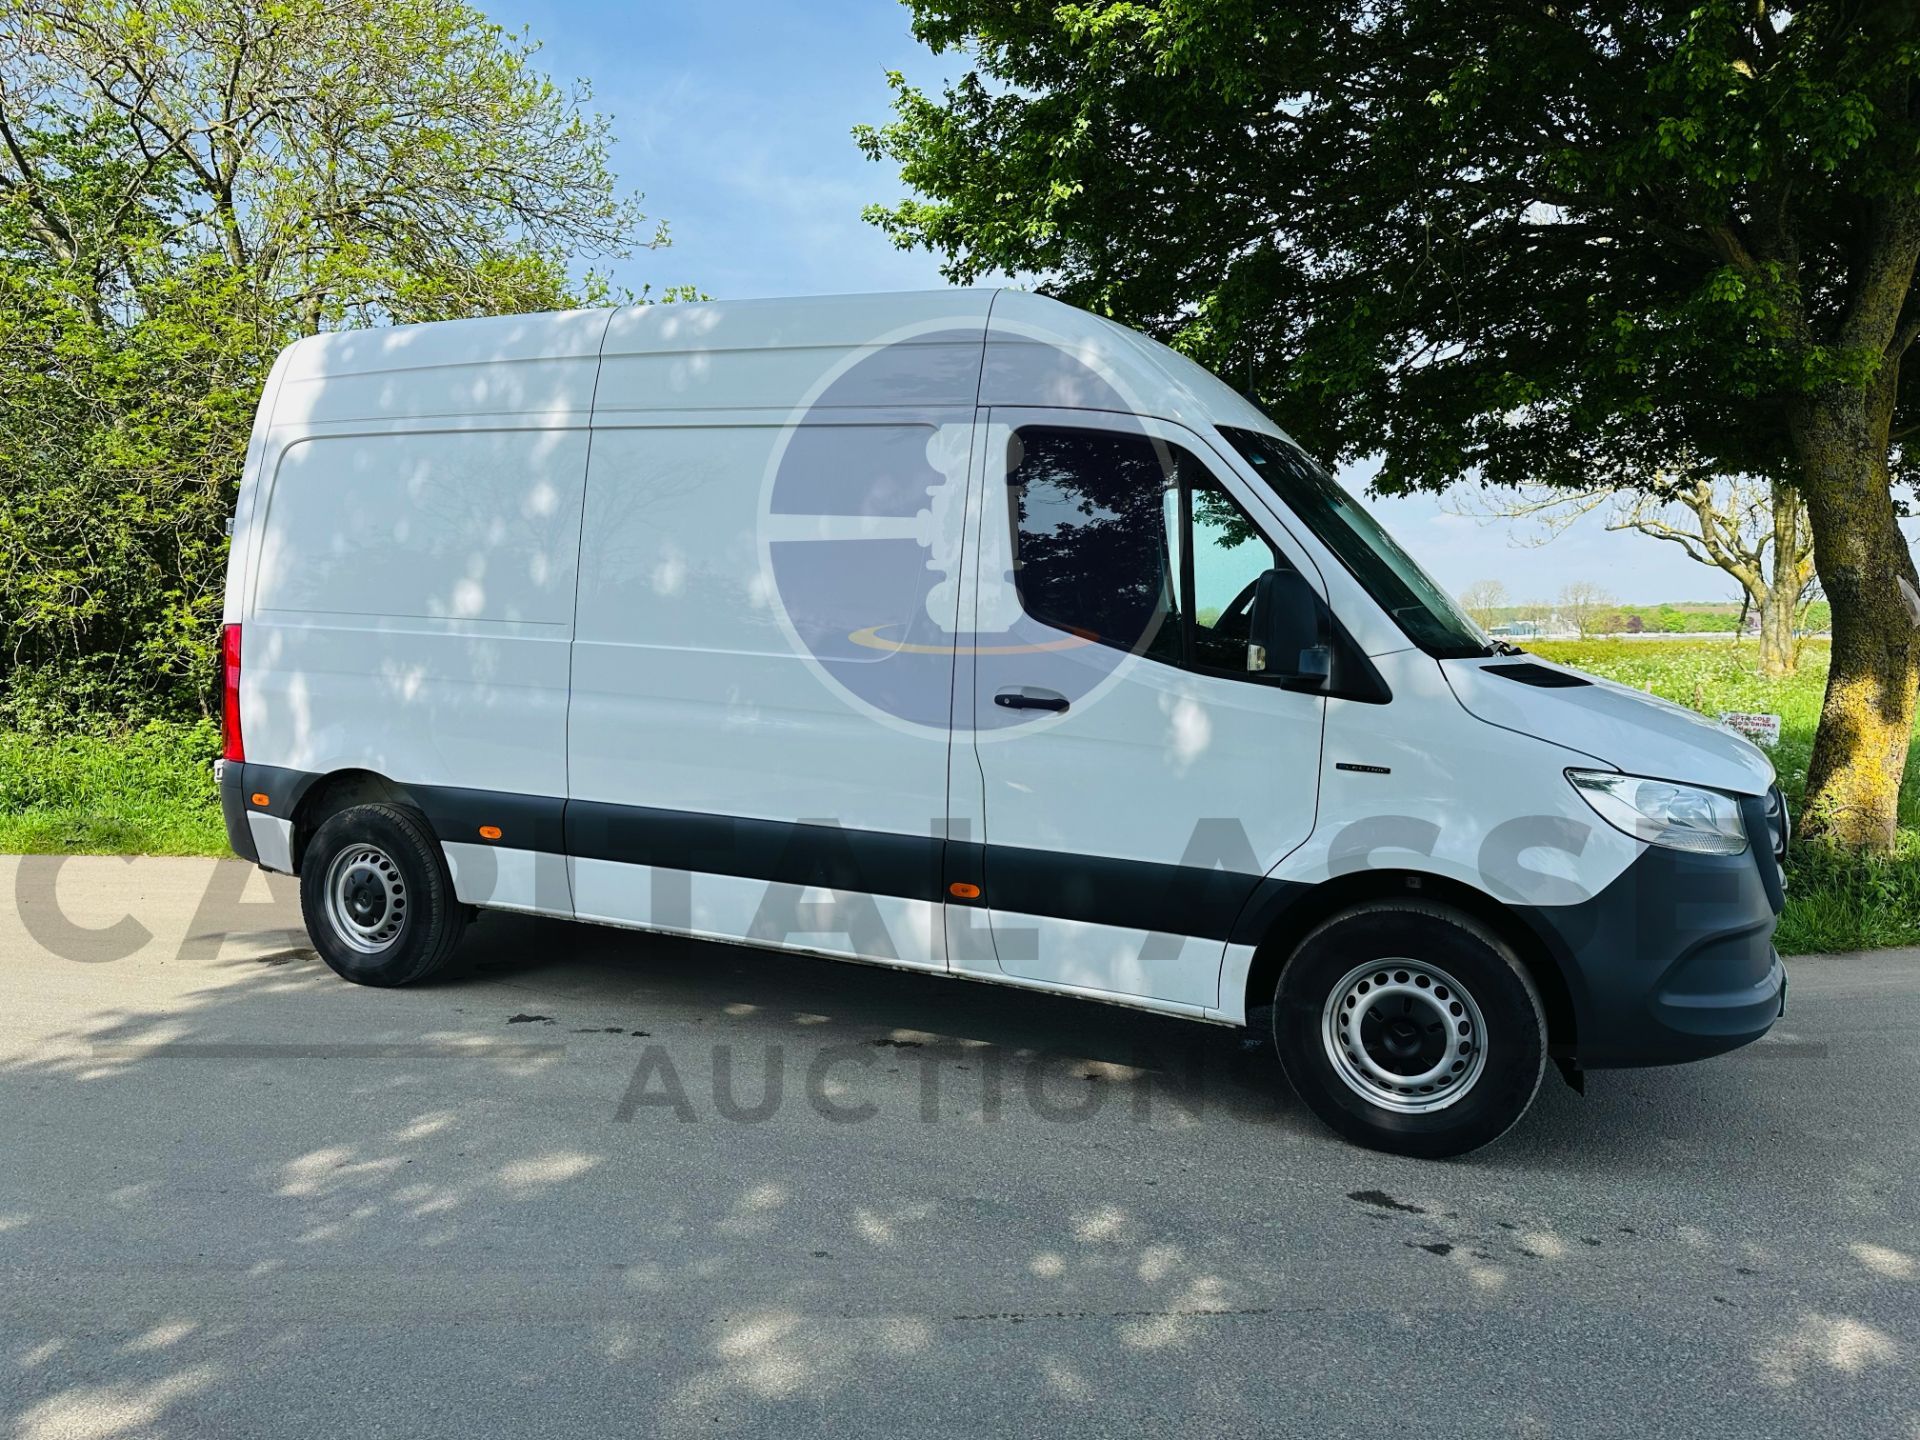 MERCEDES-BENZ SPRINTER *MEDIUM WHEEL BASE* AUTOMATIC - 2021 MODEL - AIR CONDITIONING - ONLY 5K MILES